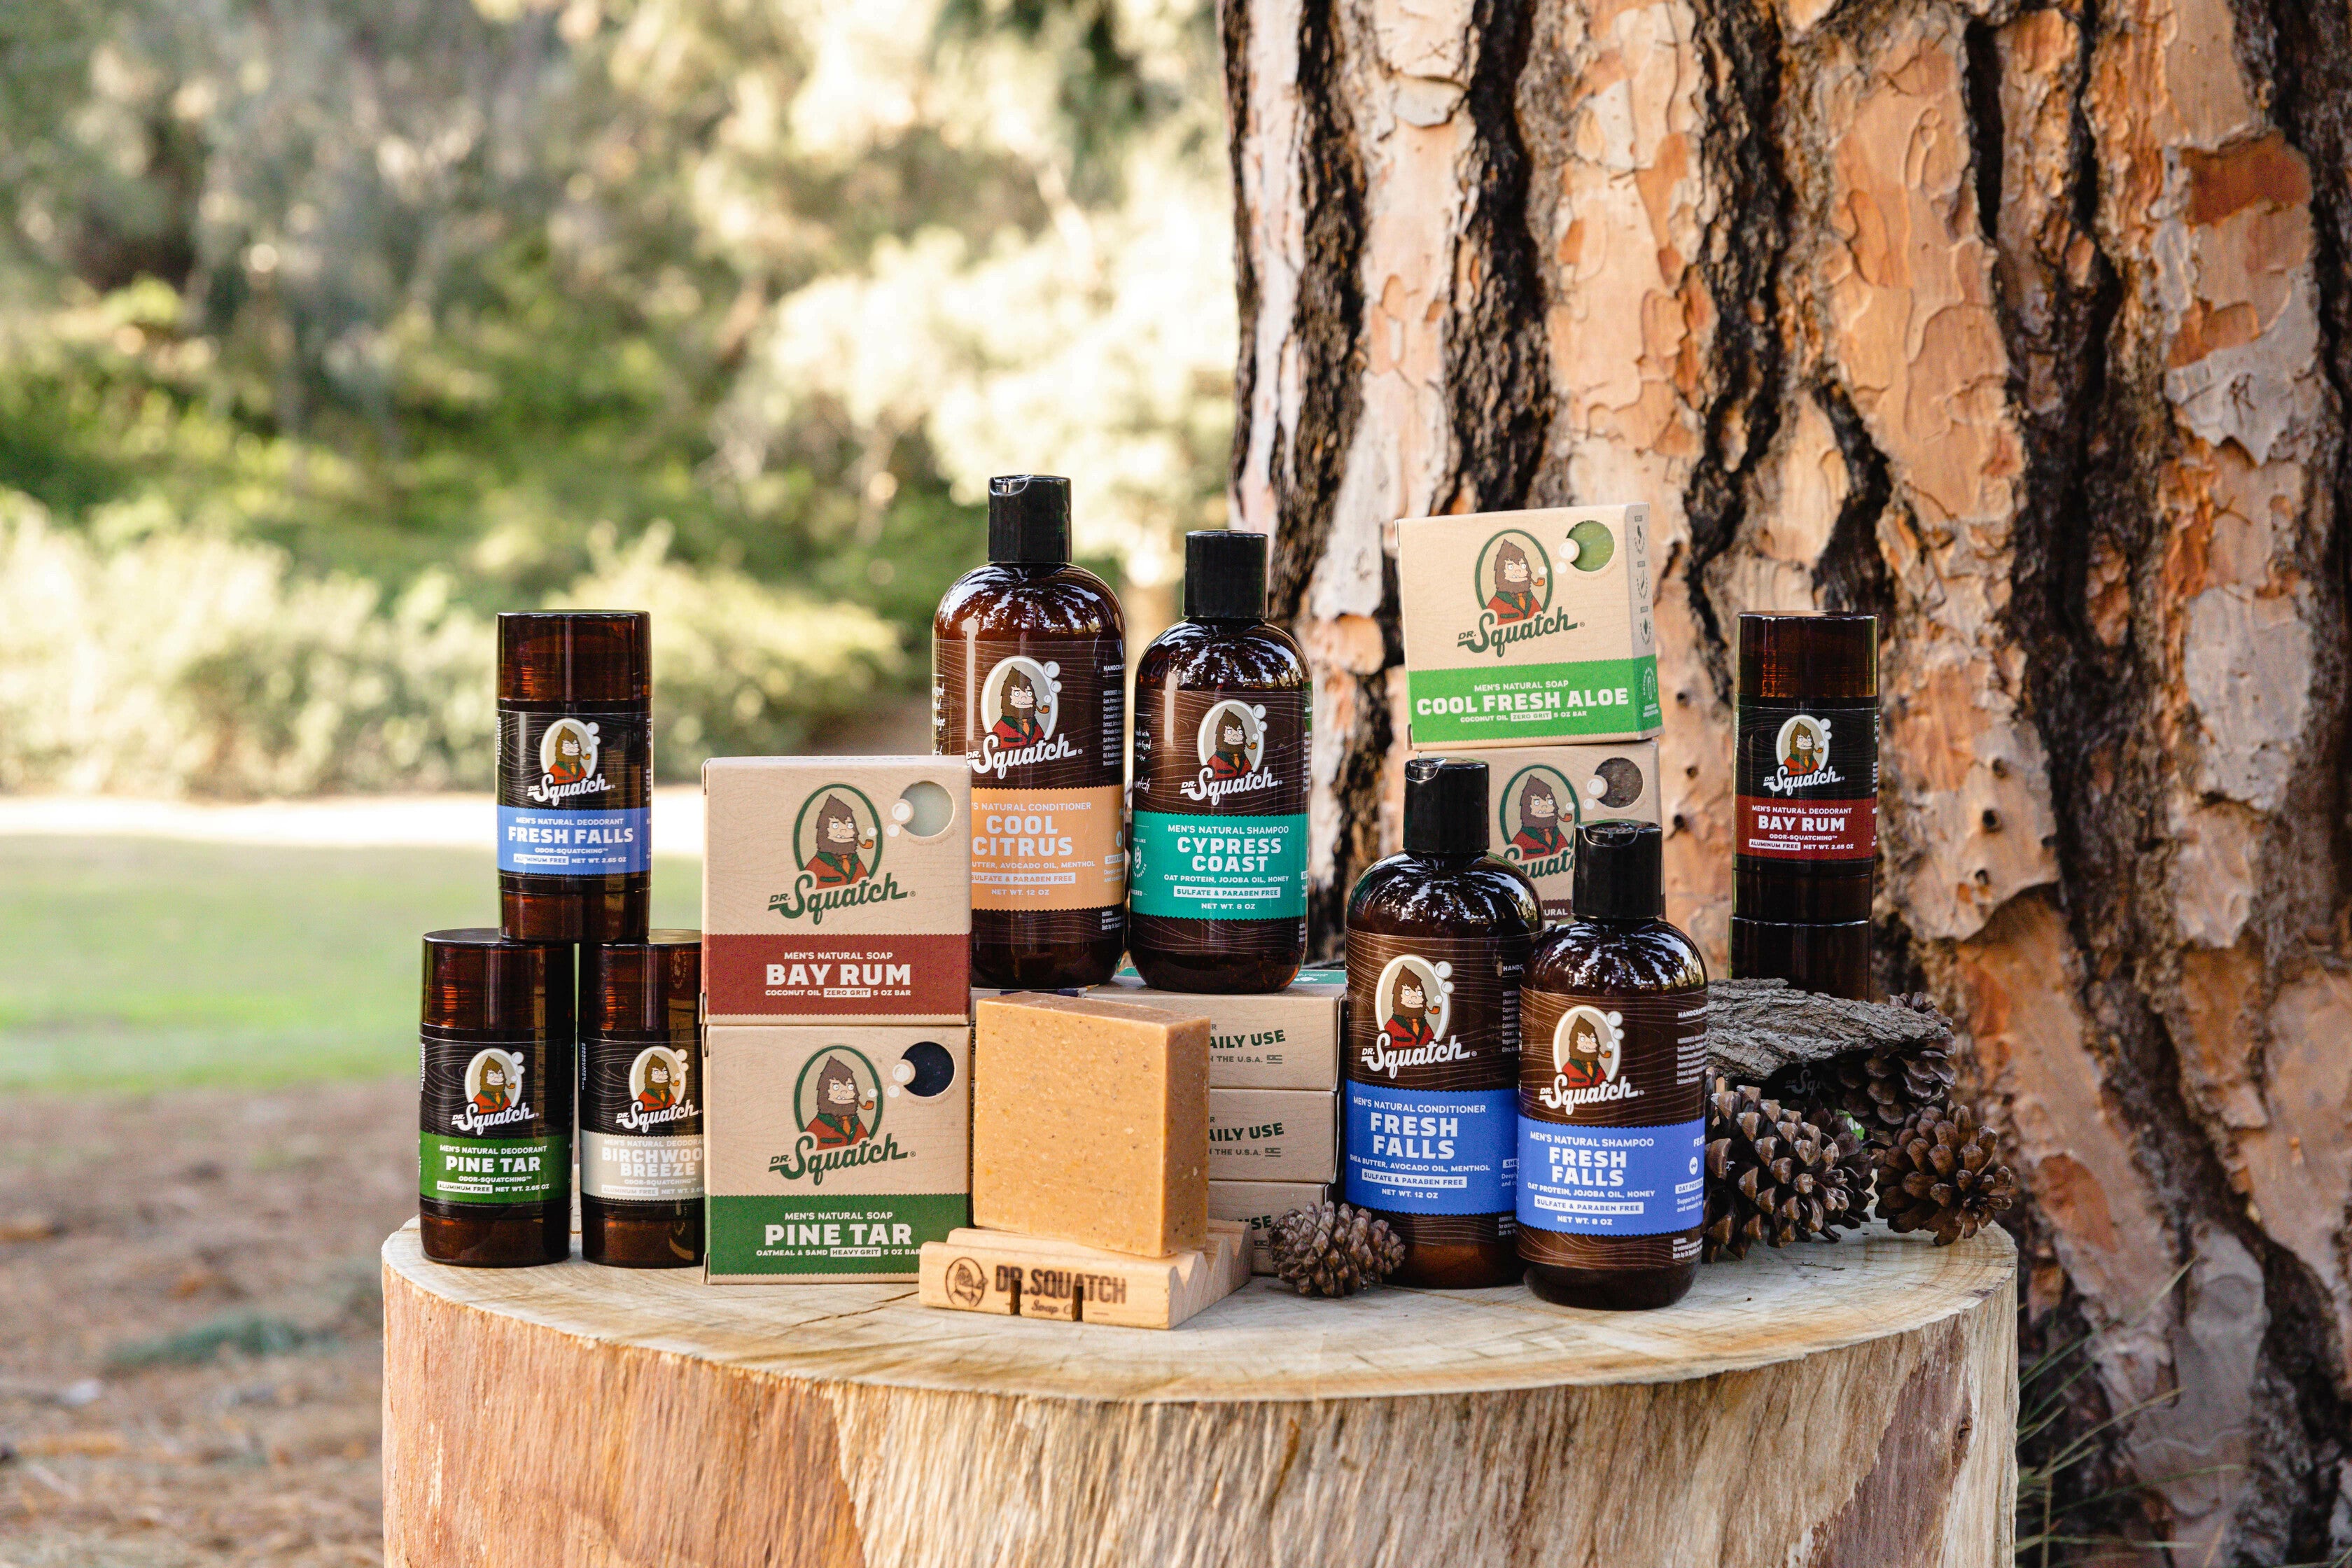 TOP 5 DR. SQUATCH SOAPS for WOMEN! 